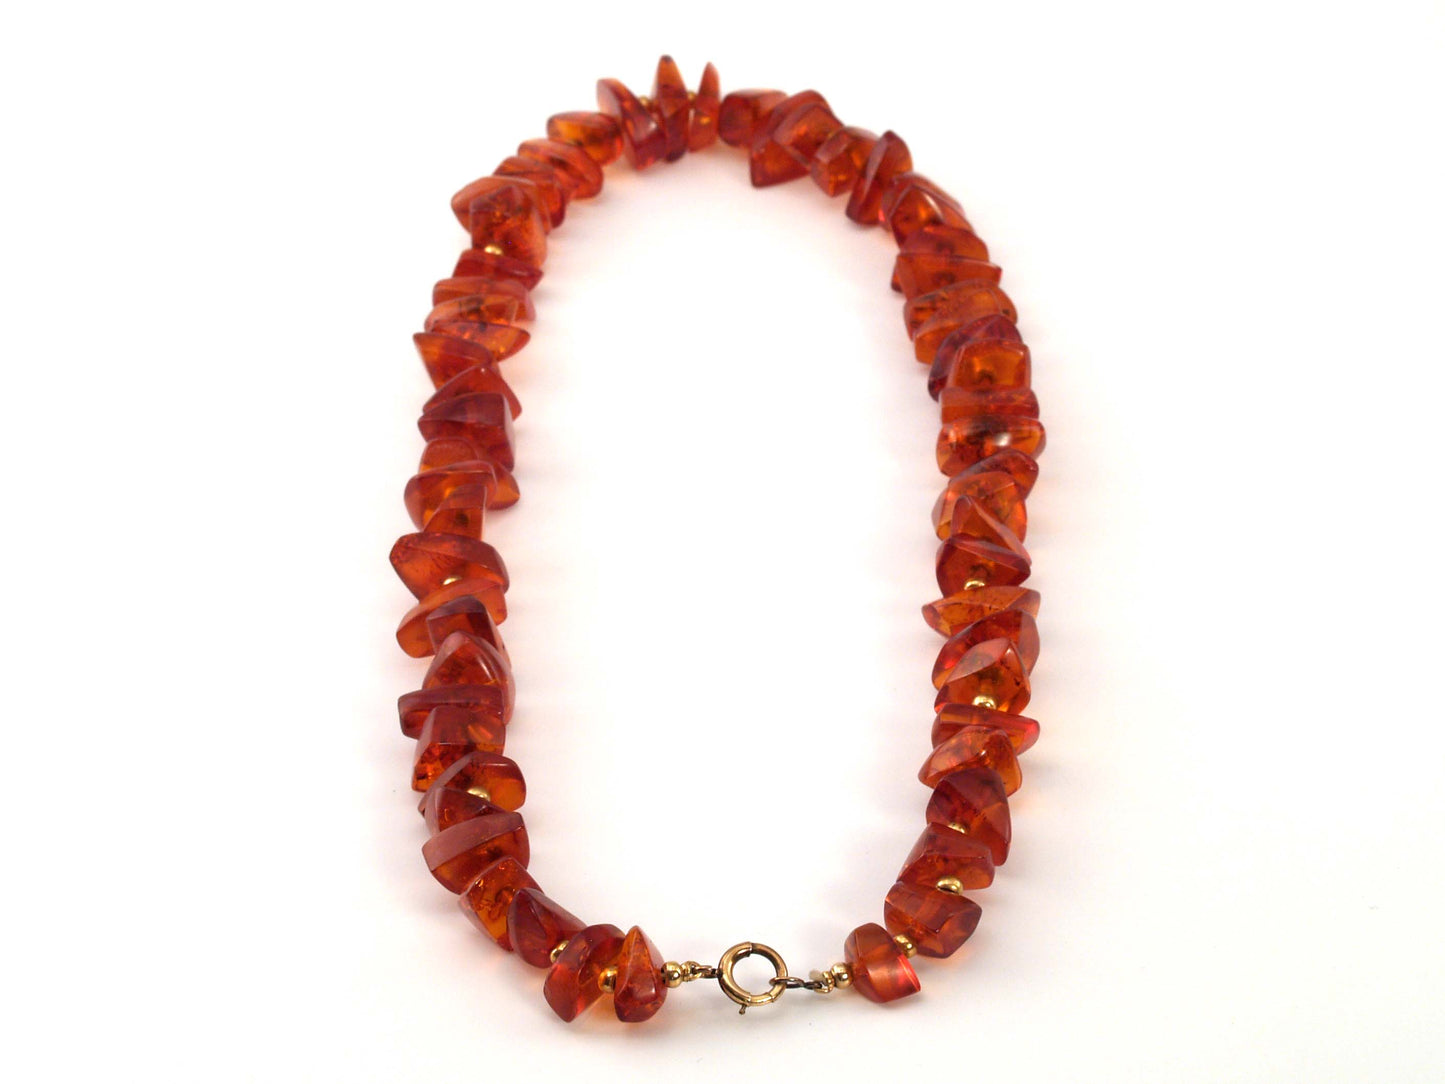 HE-Snowflake Baltic Amber rough nugget bead necklace with gold fill bead accents